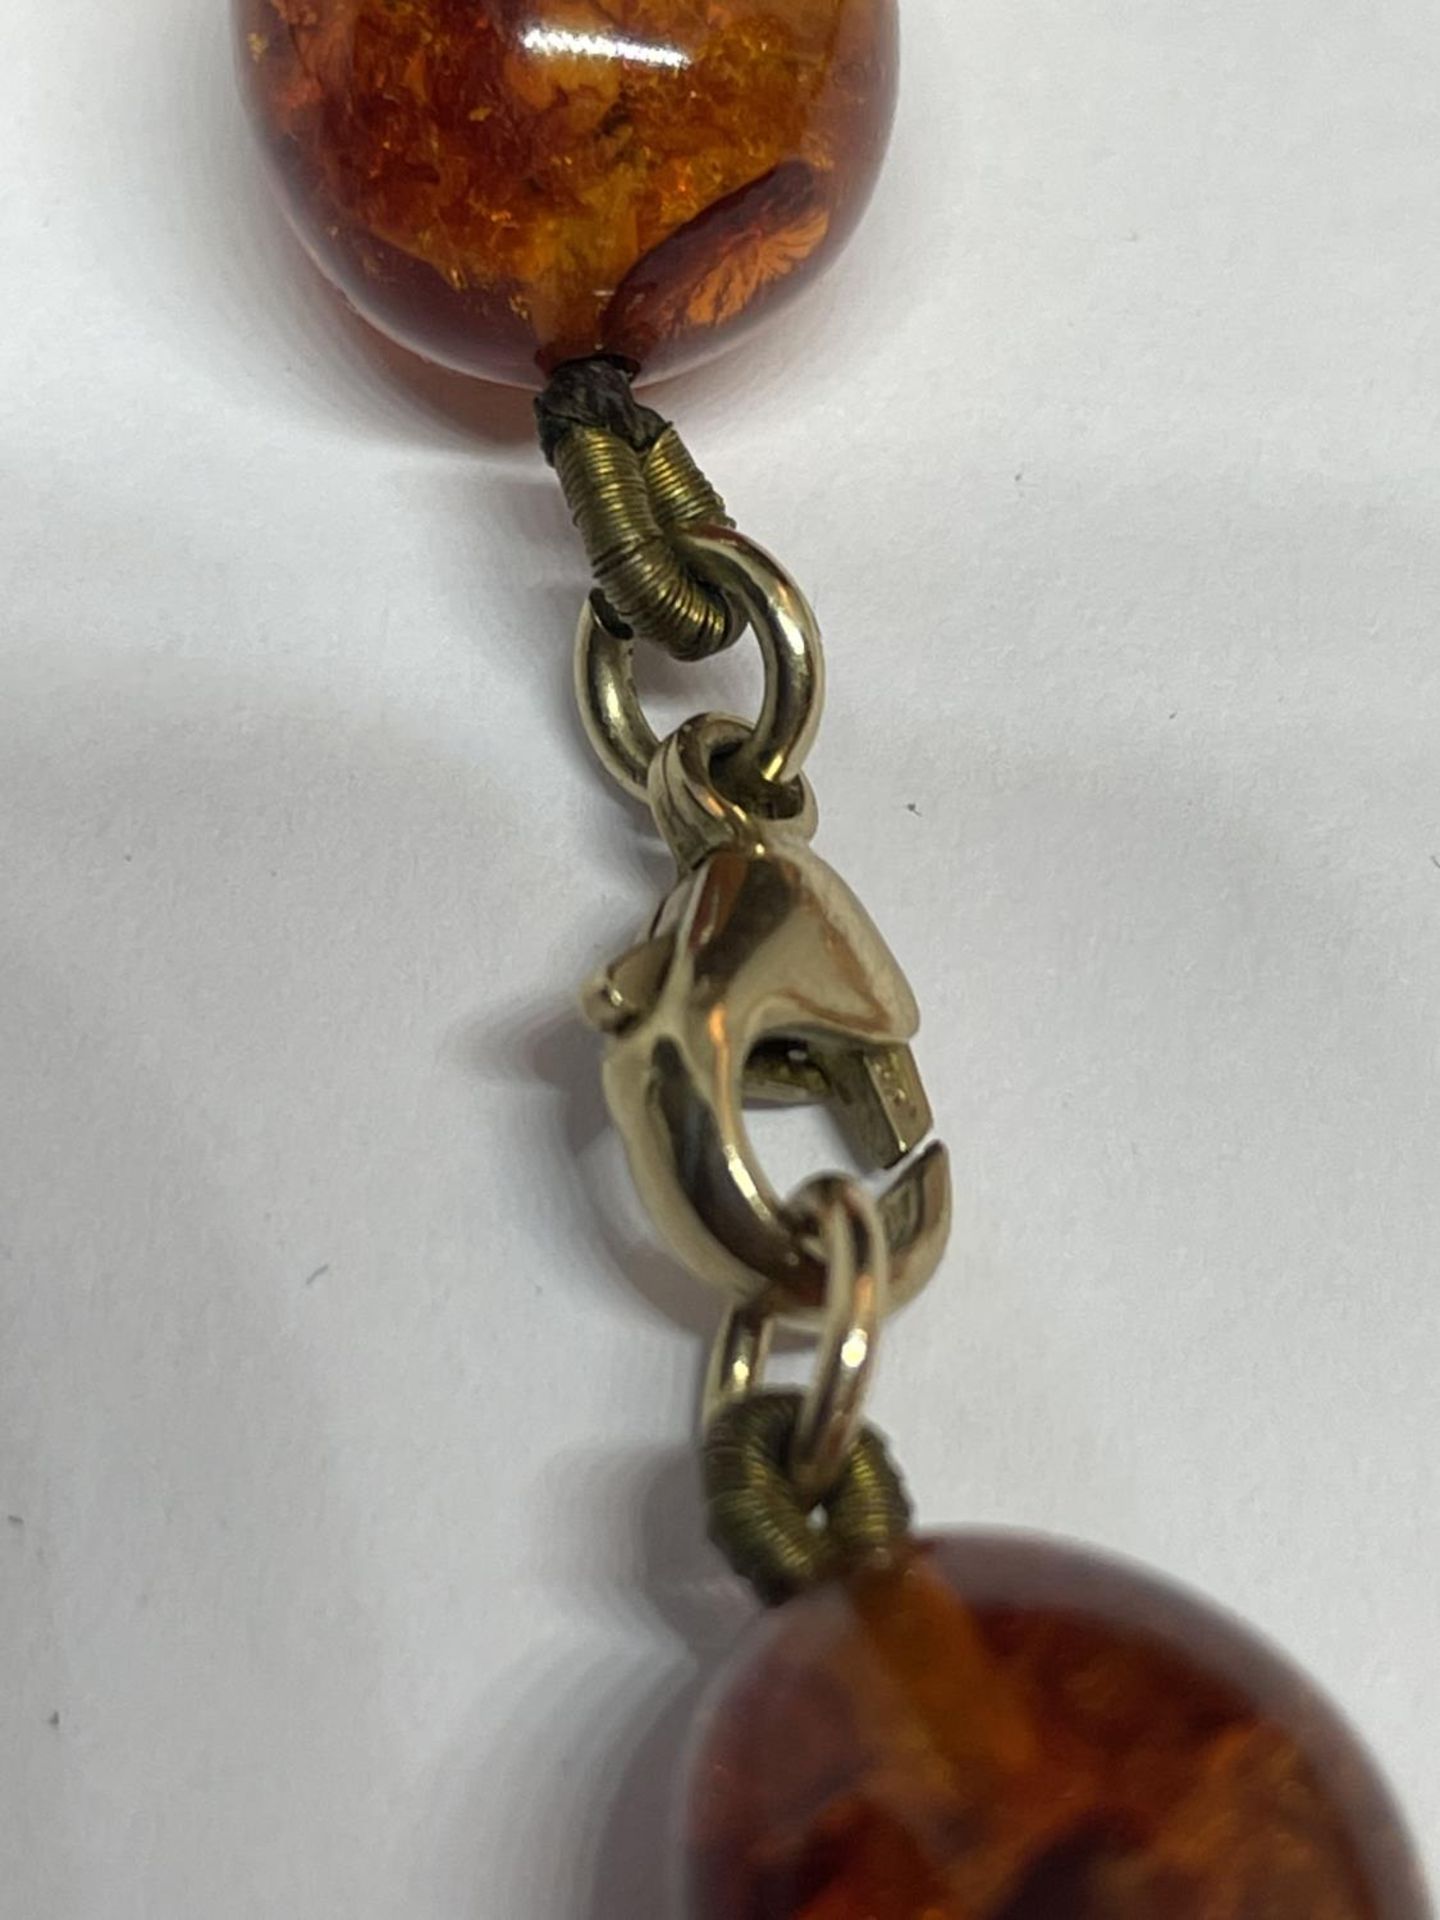 A KNOTTED AMBER NECKLACE WITH A MARKED 9K CLASP - Image 3 of 4